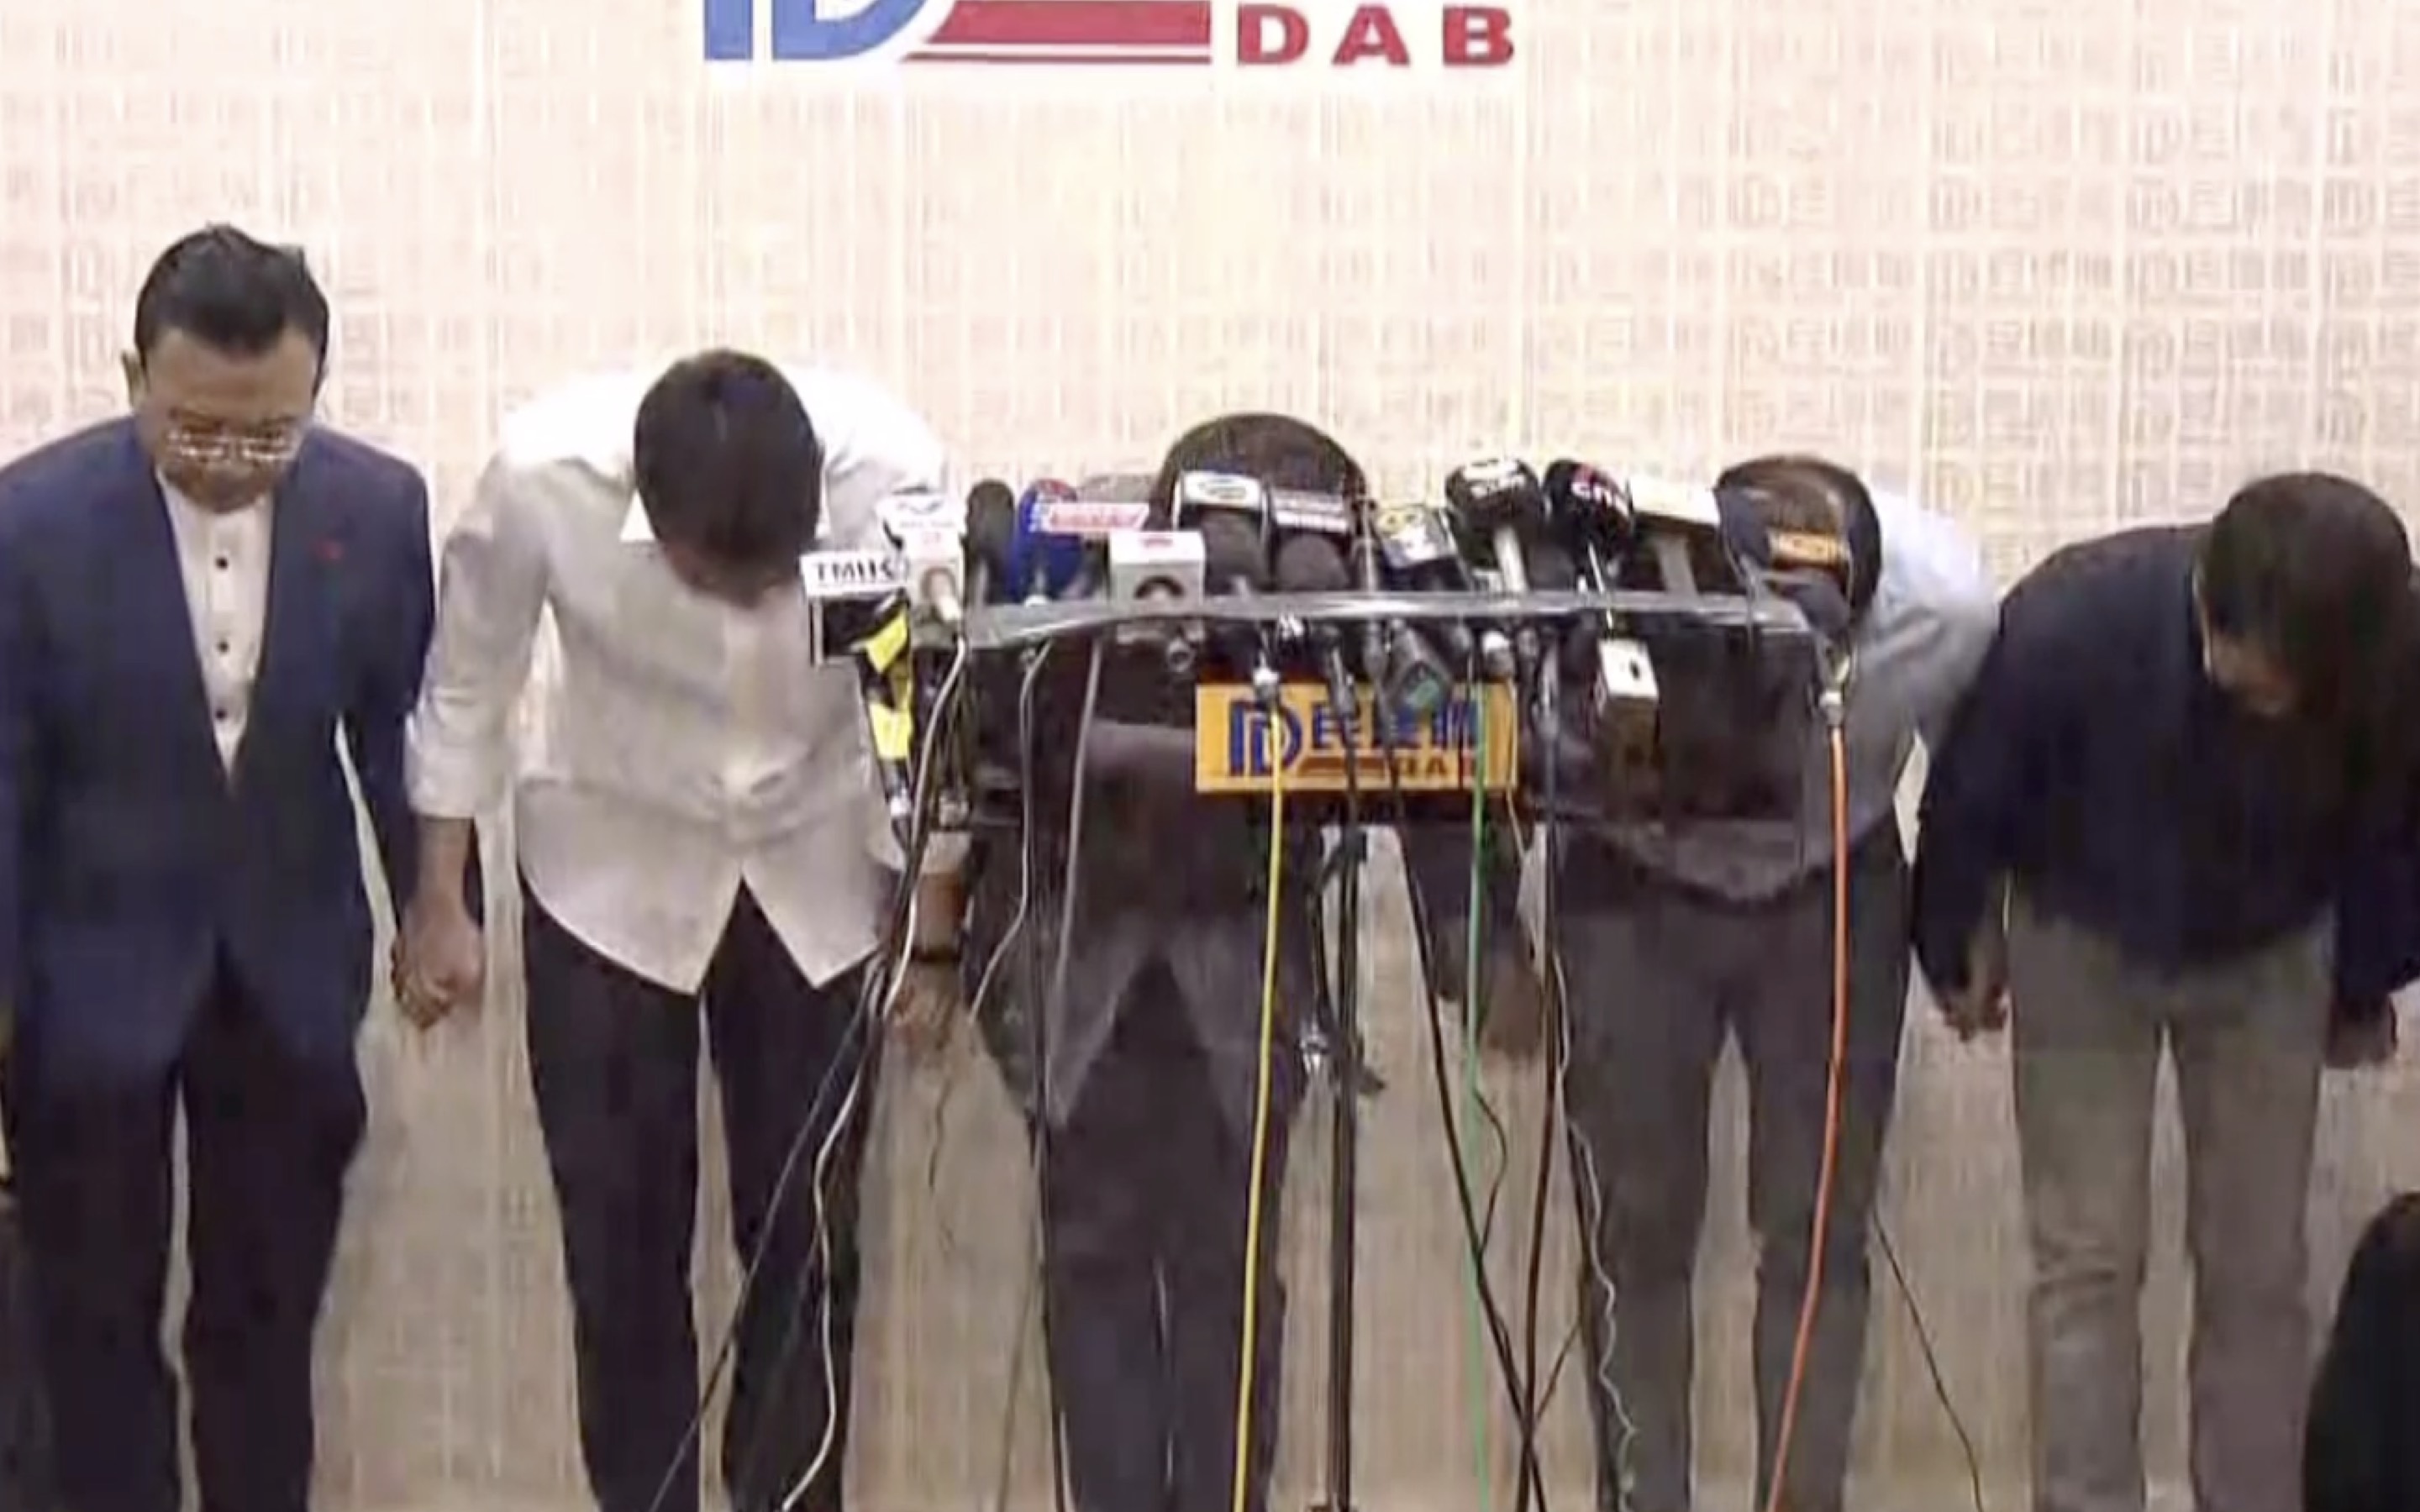 Members of the largest pro-Beijing party the DAB bow after conceding defeat at the polls at the 2019 district council elections. Screengrab via Facebook/Now TV News.